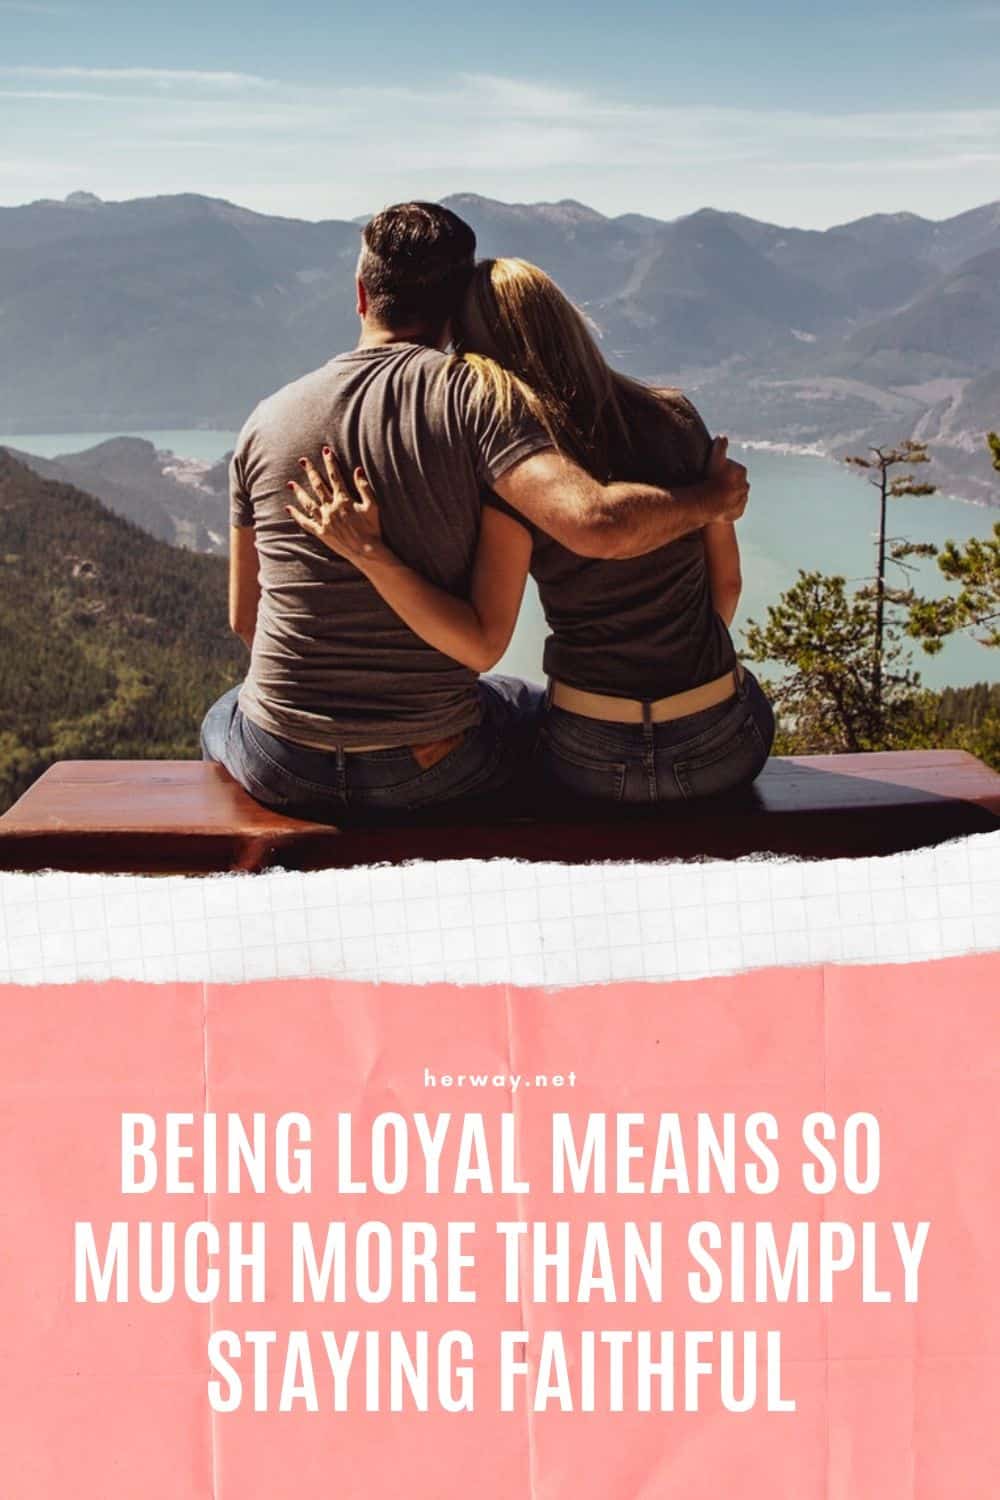 Being Loyal Means So Much More Than Simply Staying Faithful